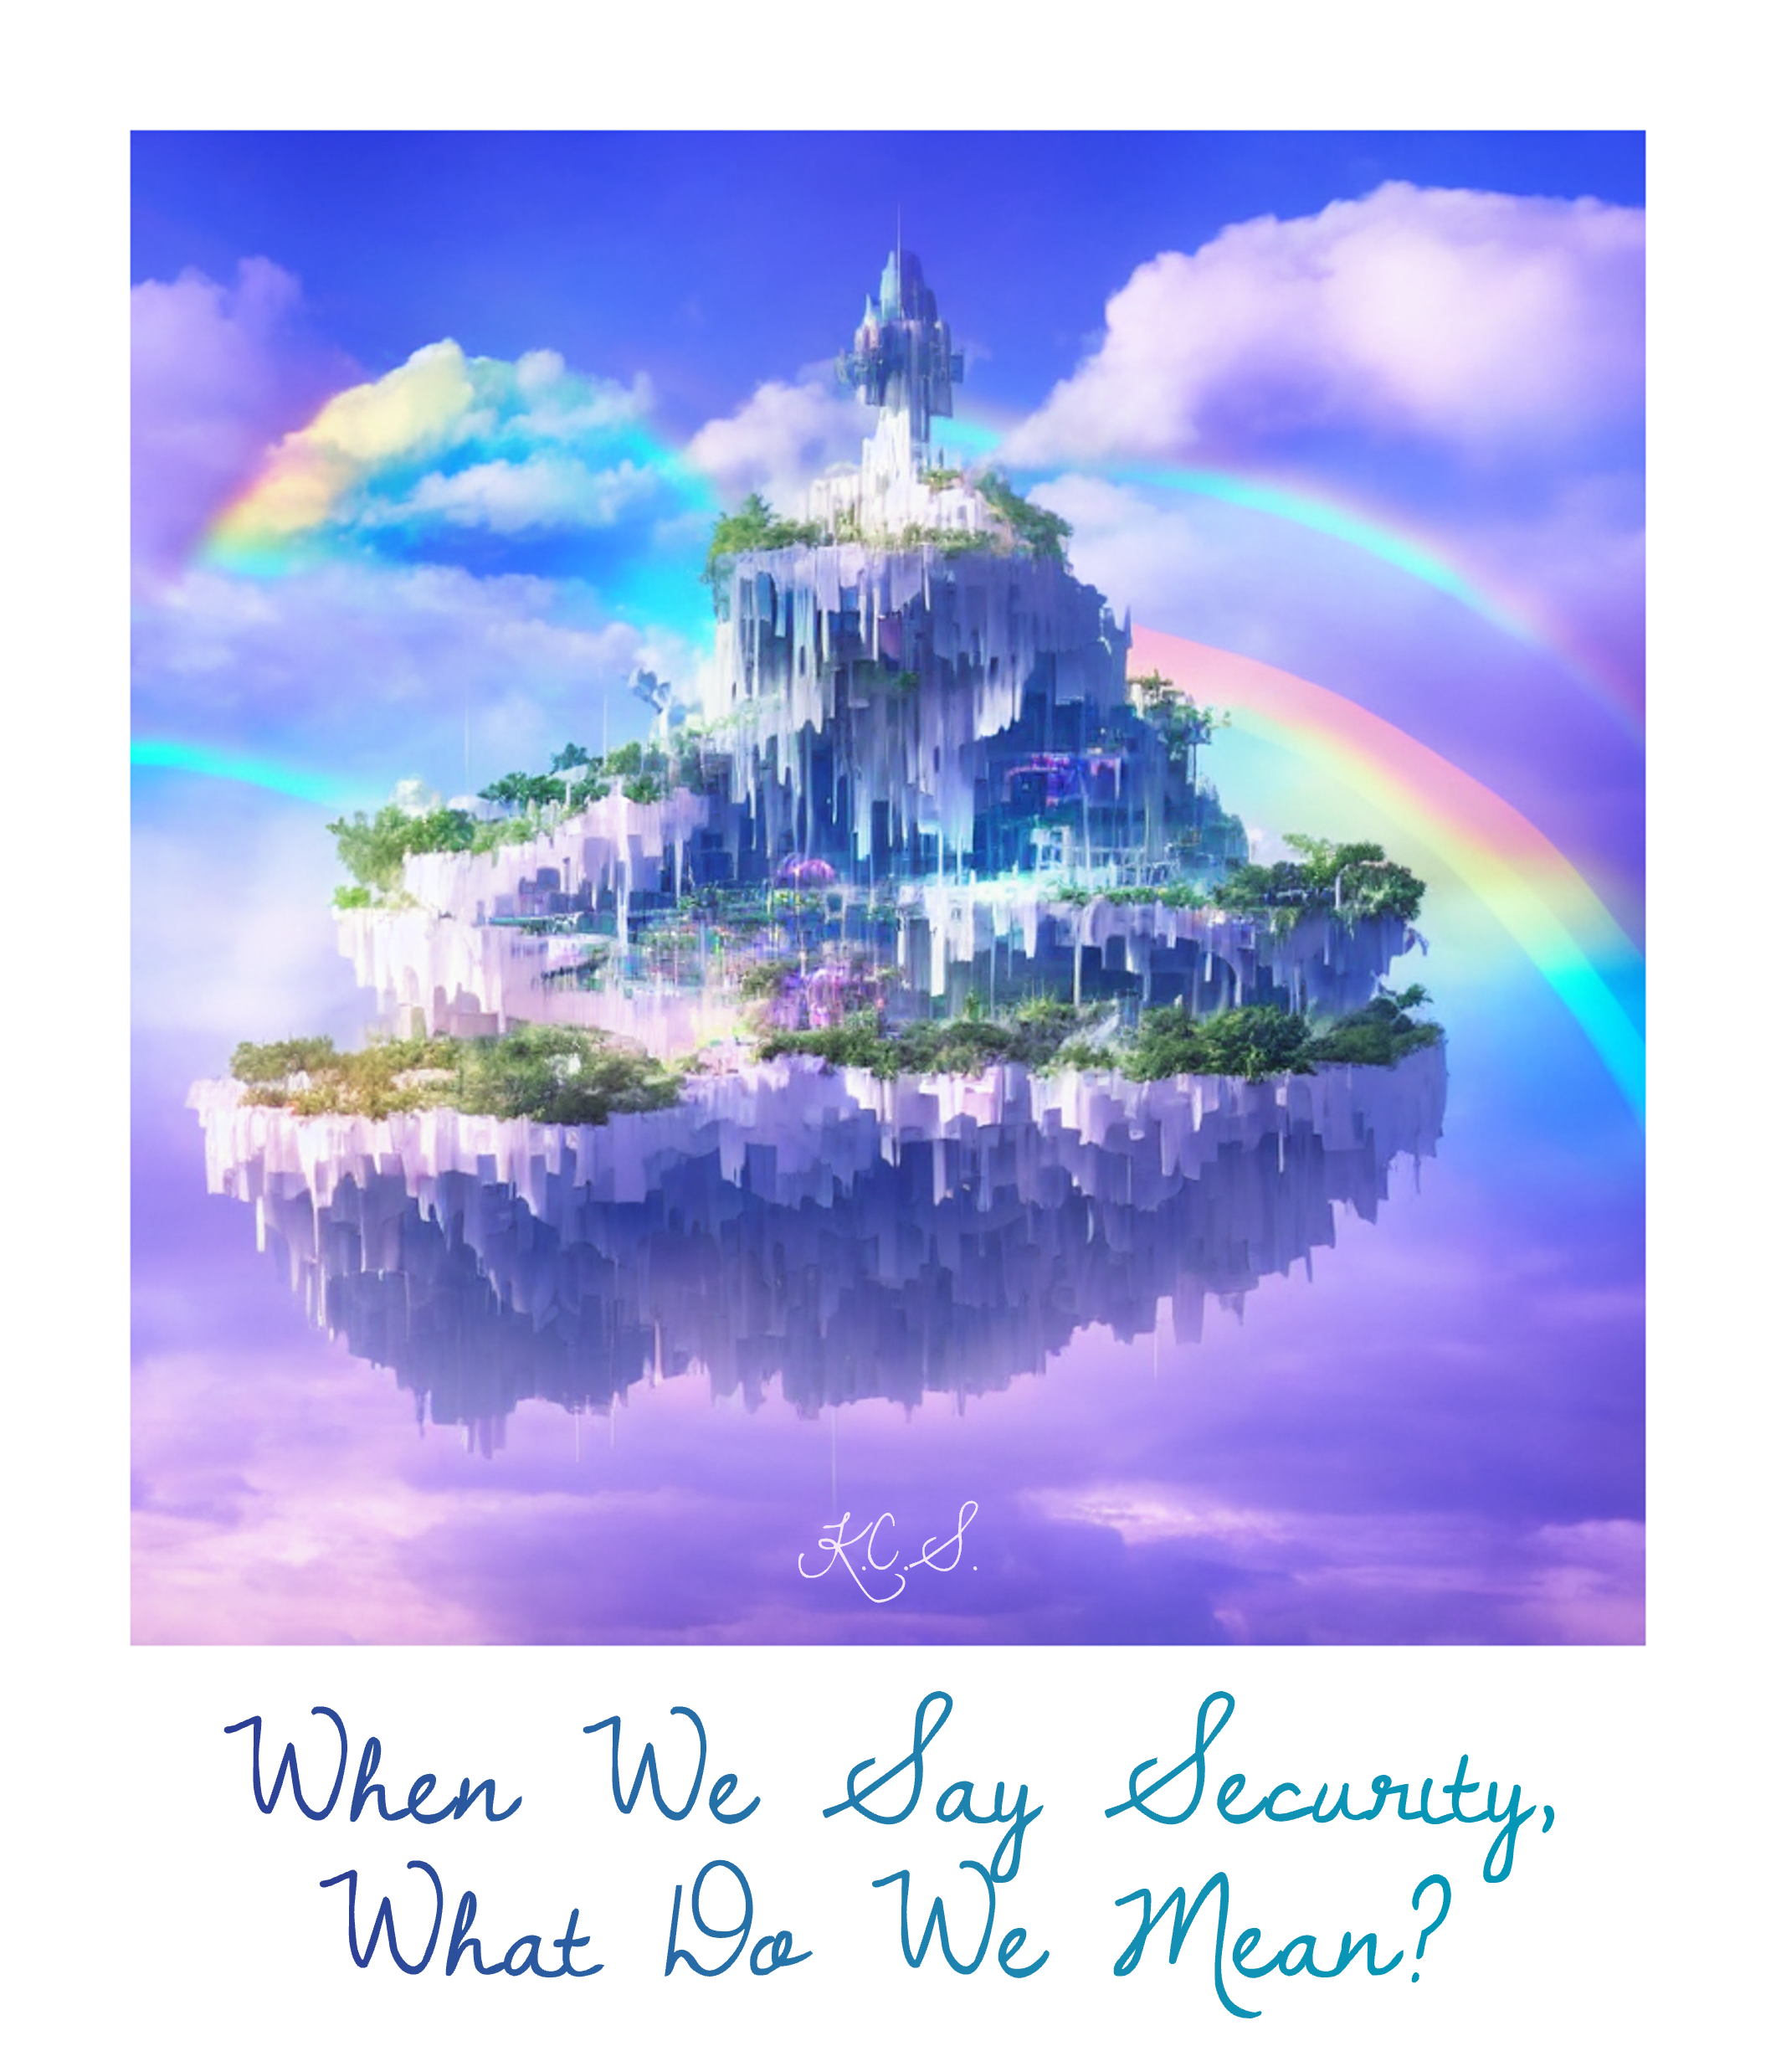 The cover art for the album with the title: What do we mean when we say security? It depicts an island floating in a sky filled with rainbow and pastel clouds in shades of periwinkle and violet. The island itself is a paradise, a blend of fantasy and cyberpunk aesthetics. Lush trees blanket its ledges while waterfalls cascade from each ledge, frozen in time and resembling a beautiful digital glitch. It is meant to reflect the utopia we might achieve with our systems – our own islands – if we embraced the original meanings of the word security.